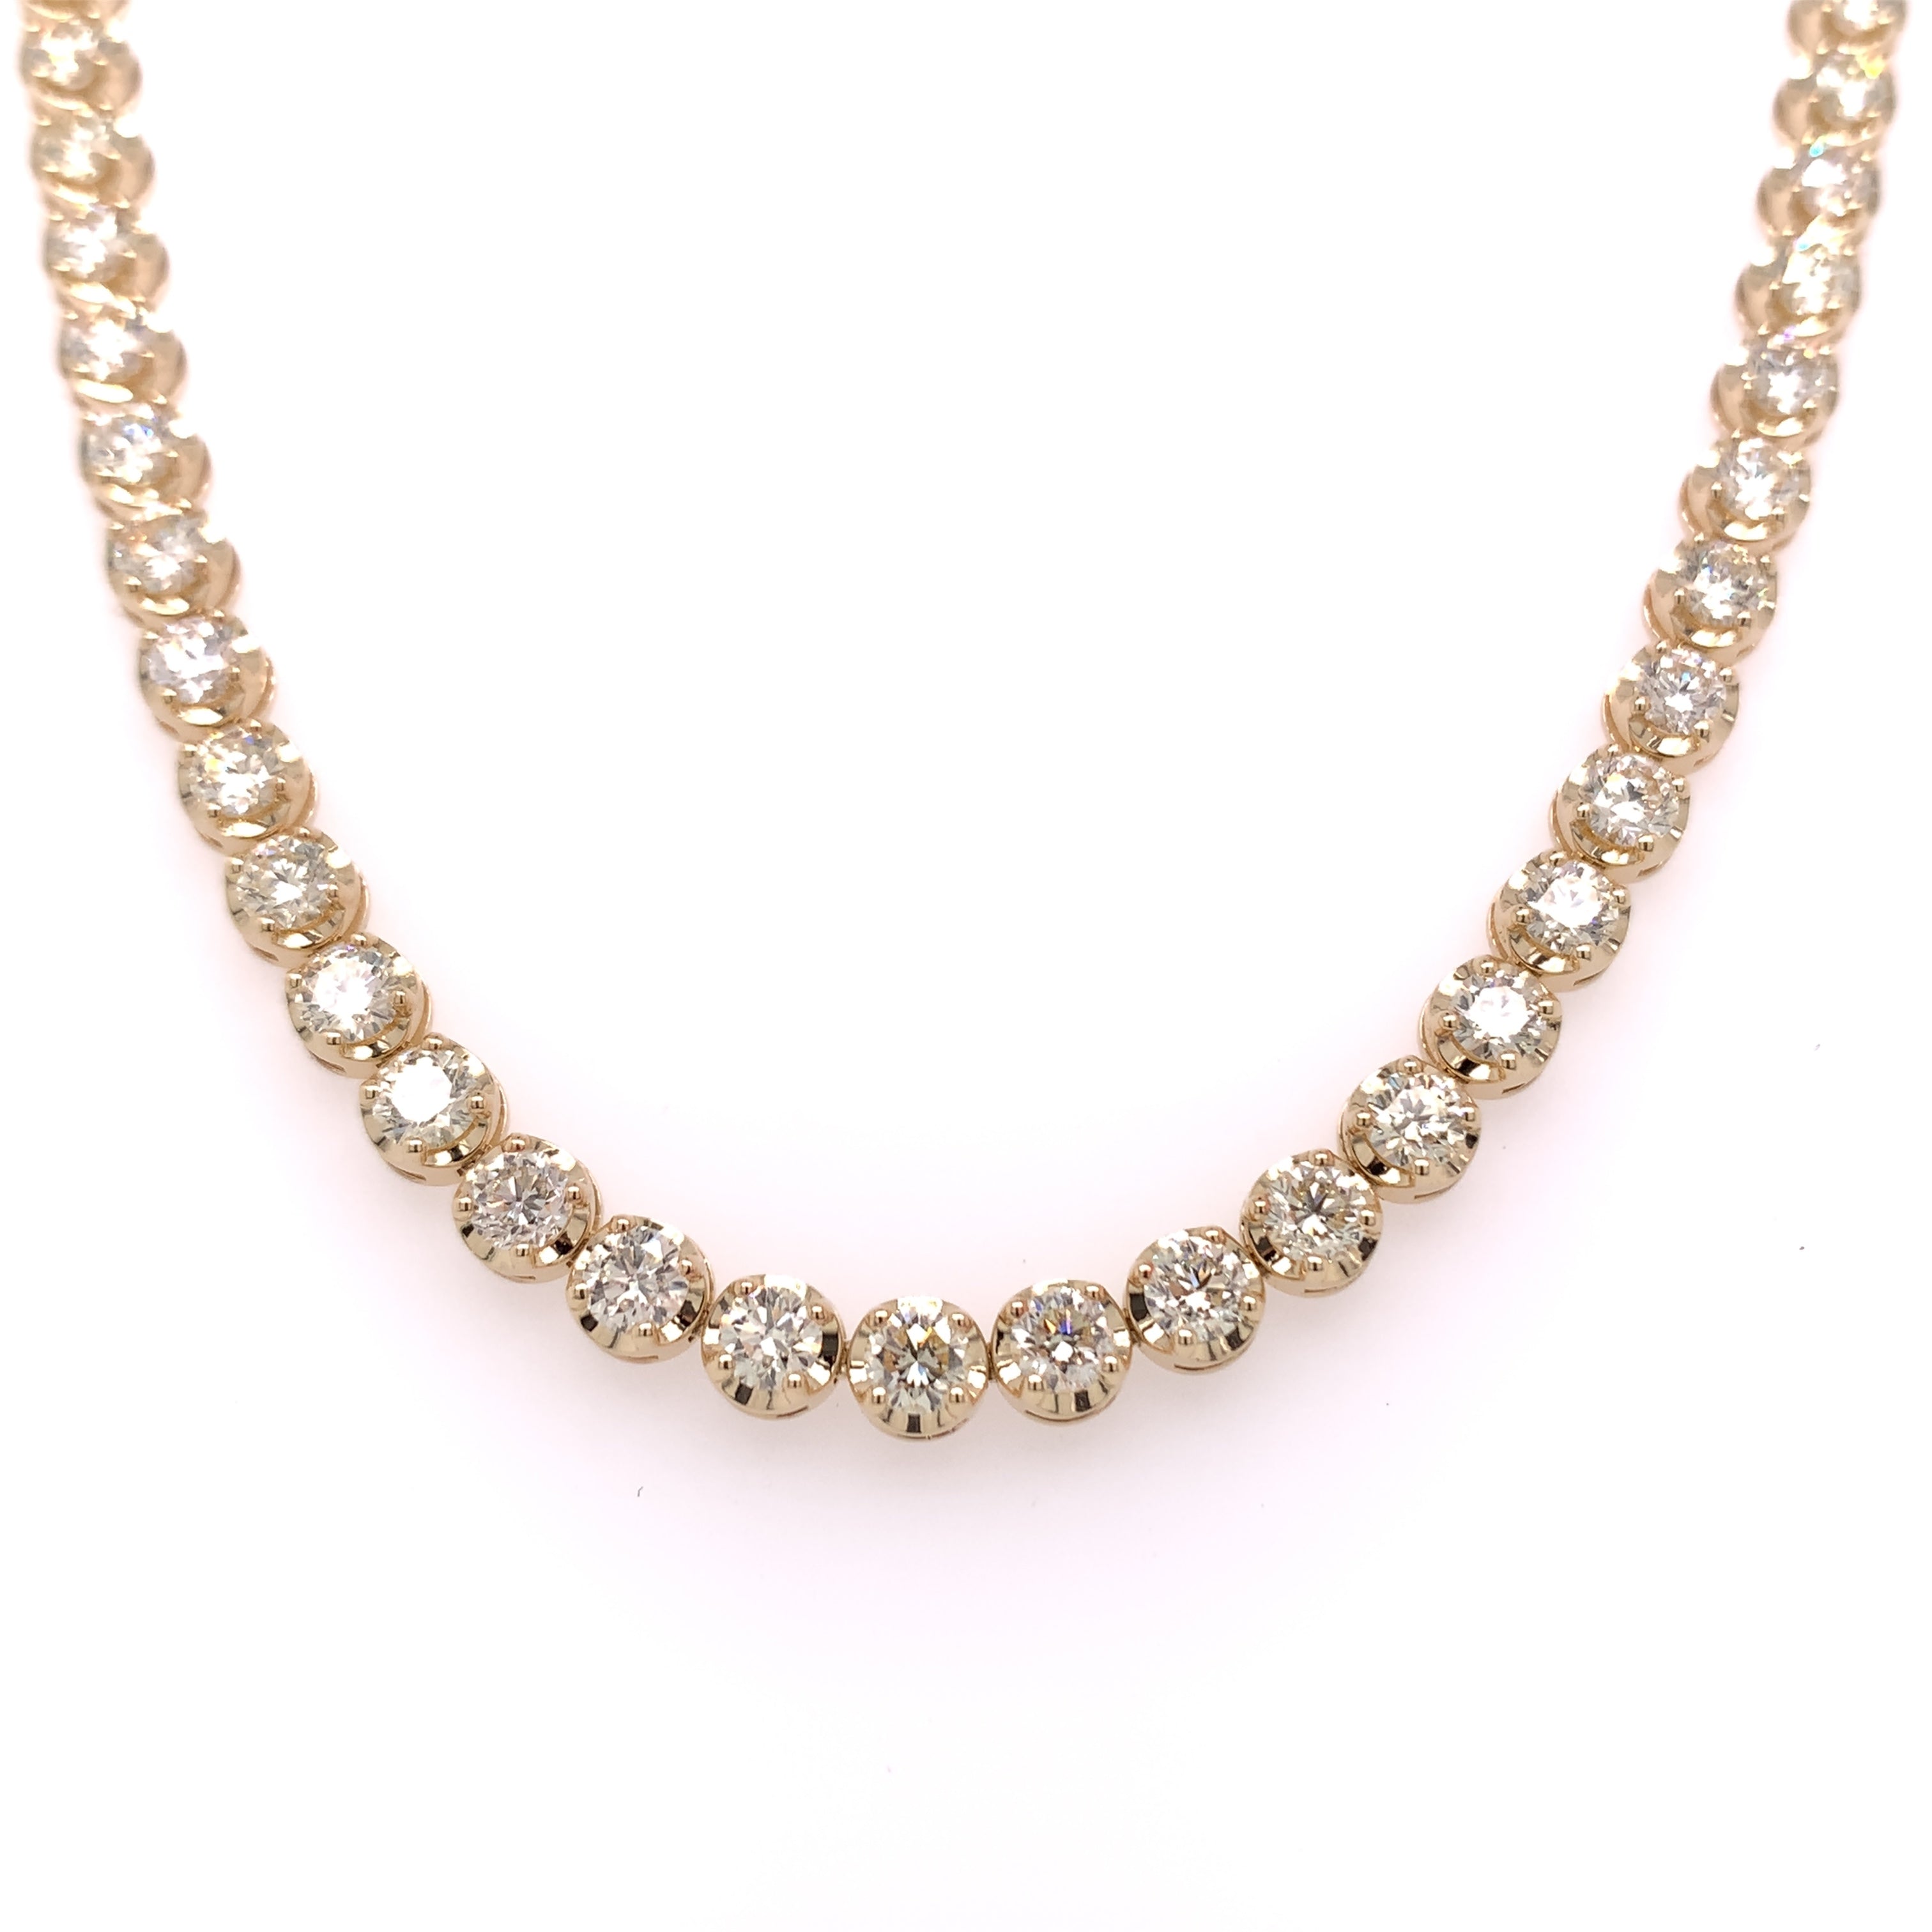 16.00 CT. - 30.00 CT. 18 Pointer Diamond Crown Setting Tennis Chain in Gold - White Carat - USA & Canada